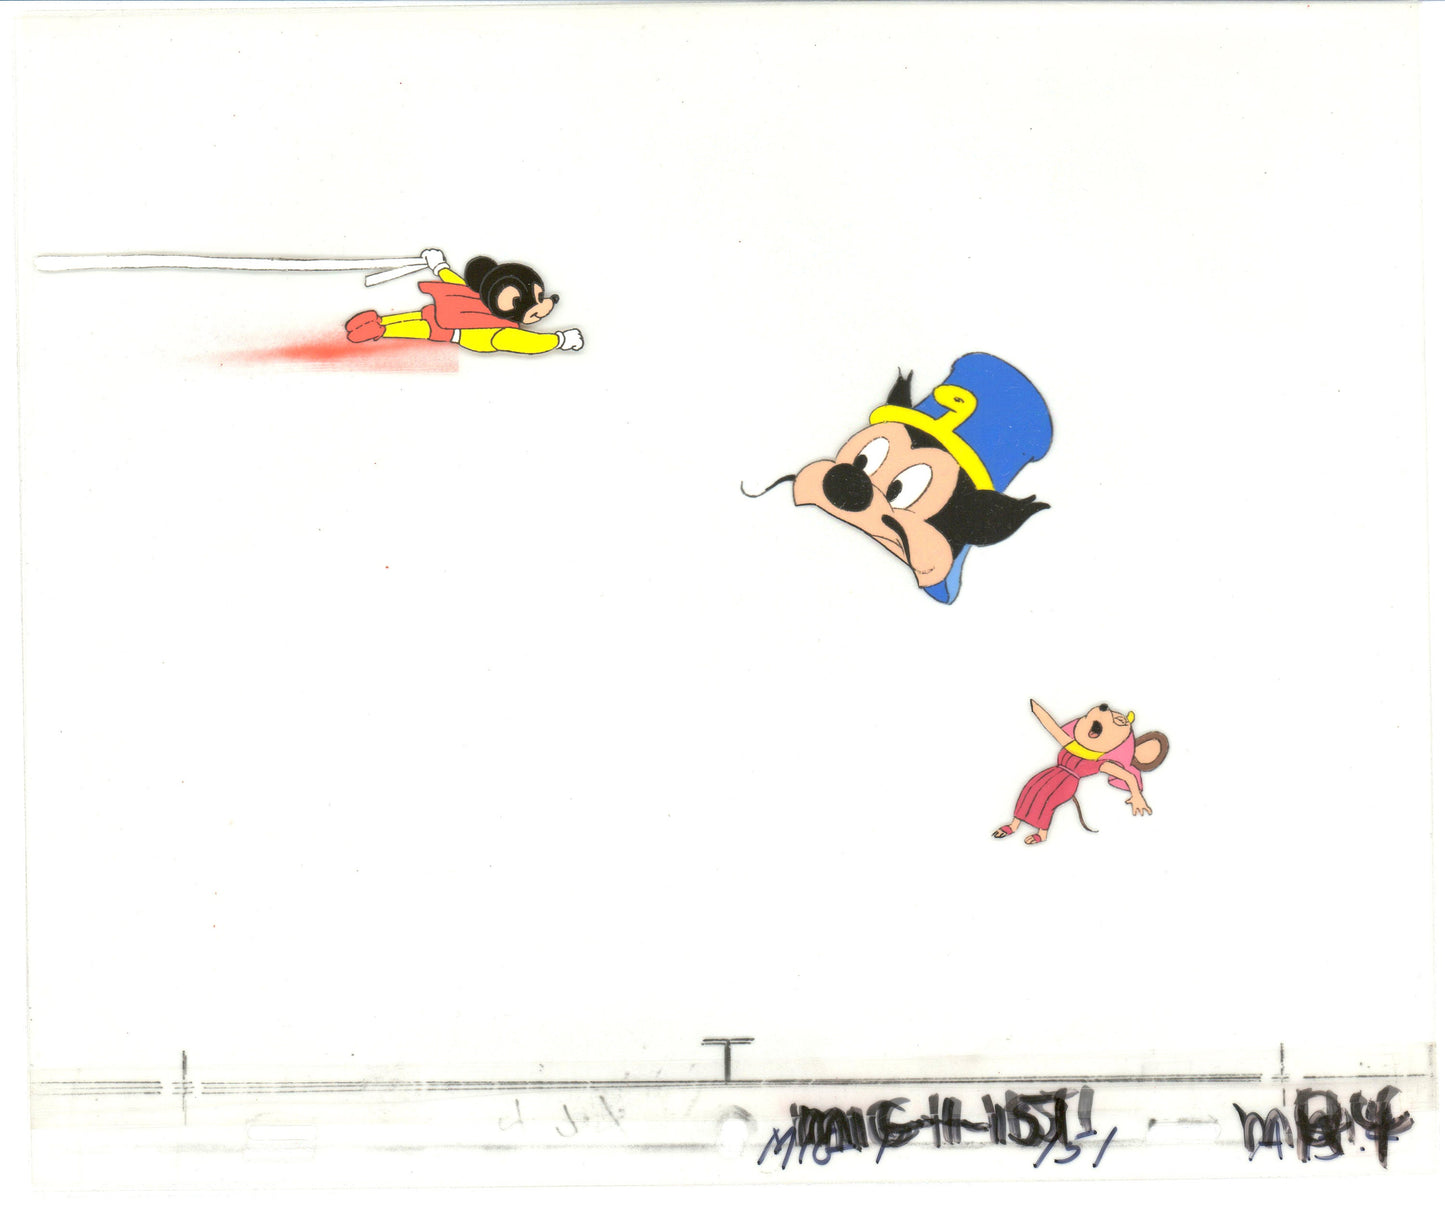 Mighty Mouse Cartoon Production Animation Cel Setup from Filmation Anime 1979-80 B2010